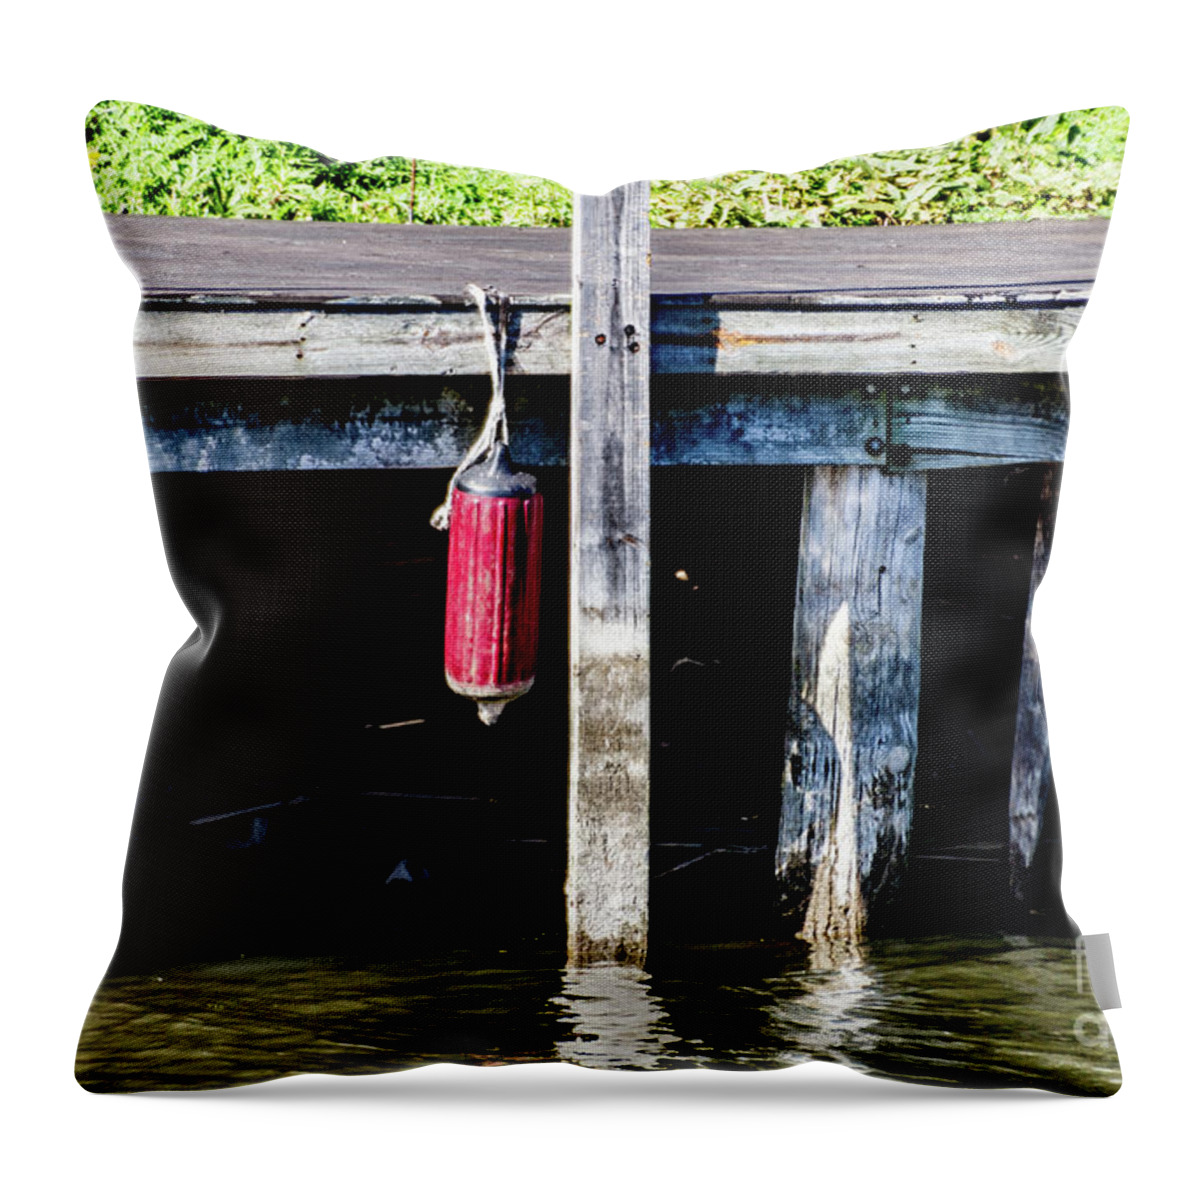 Dock Throw Pillow featuring the photograph Boat Bumper by William Norton